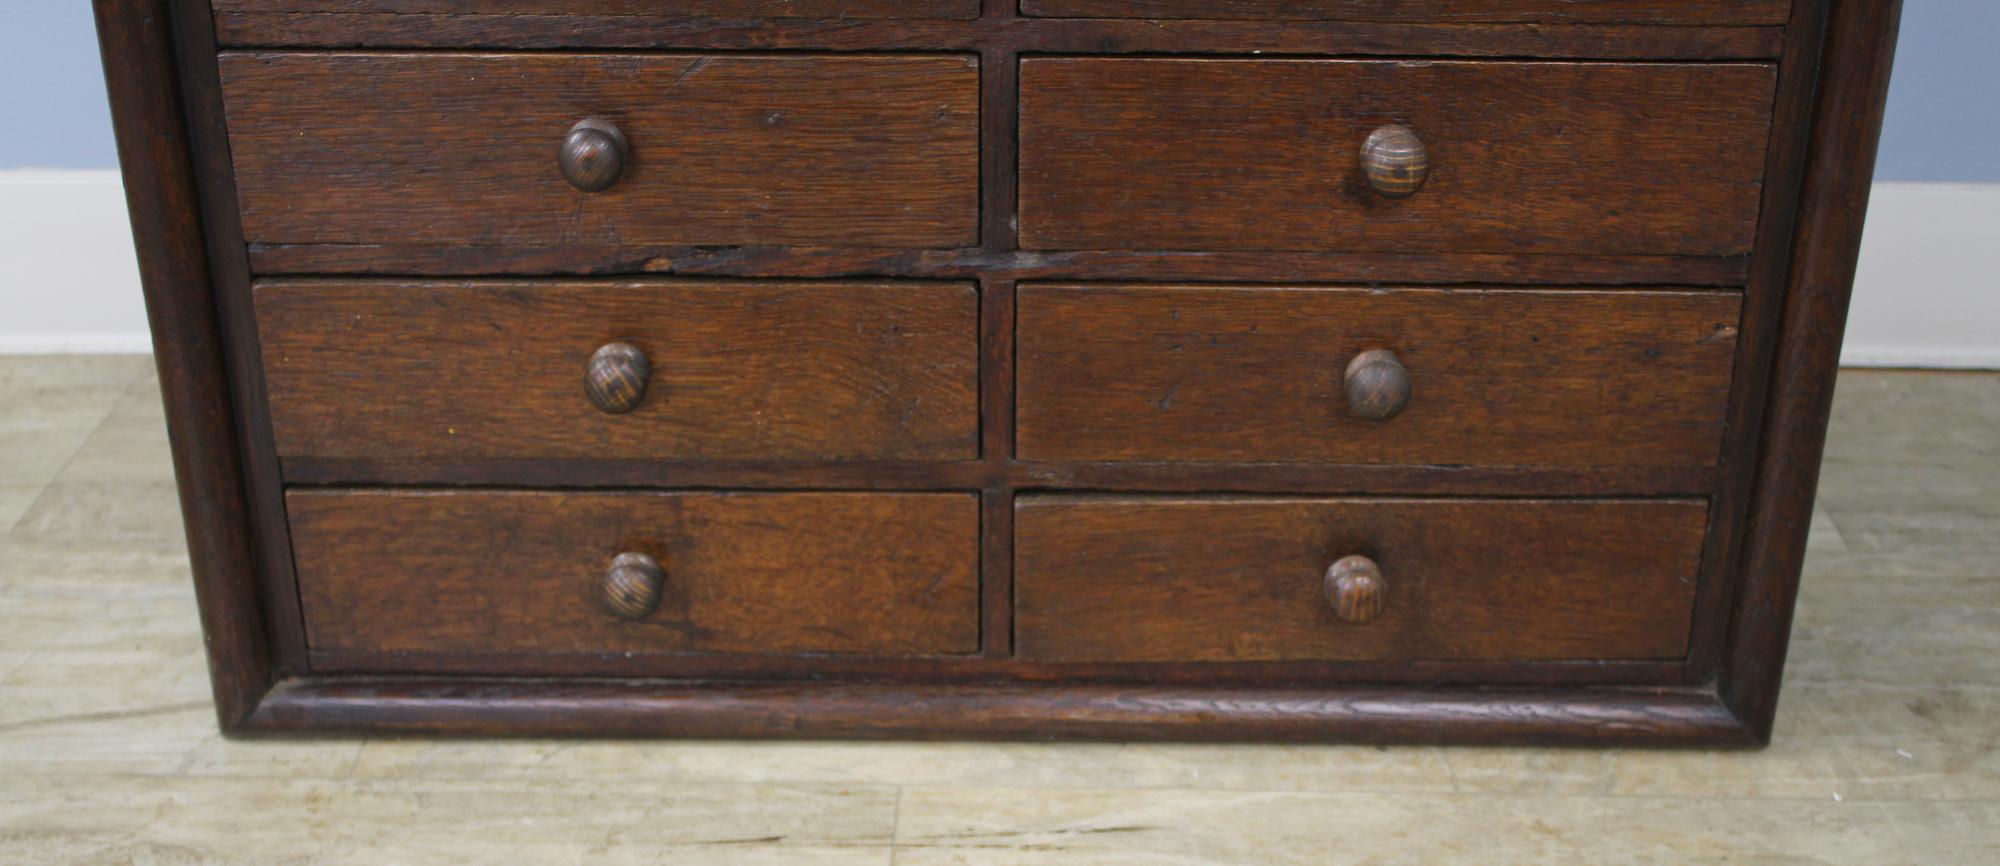 19th Century Antique Marble-Topped Bank of Drawers